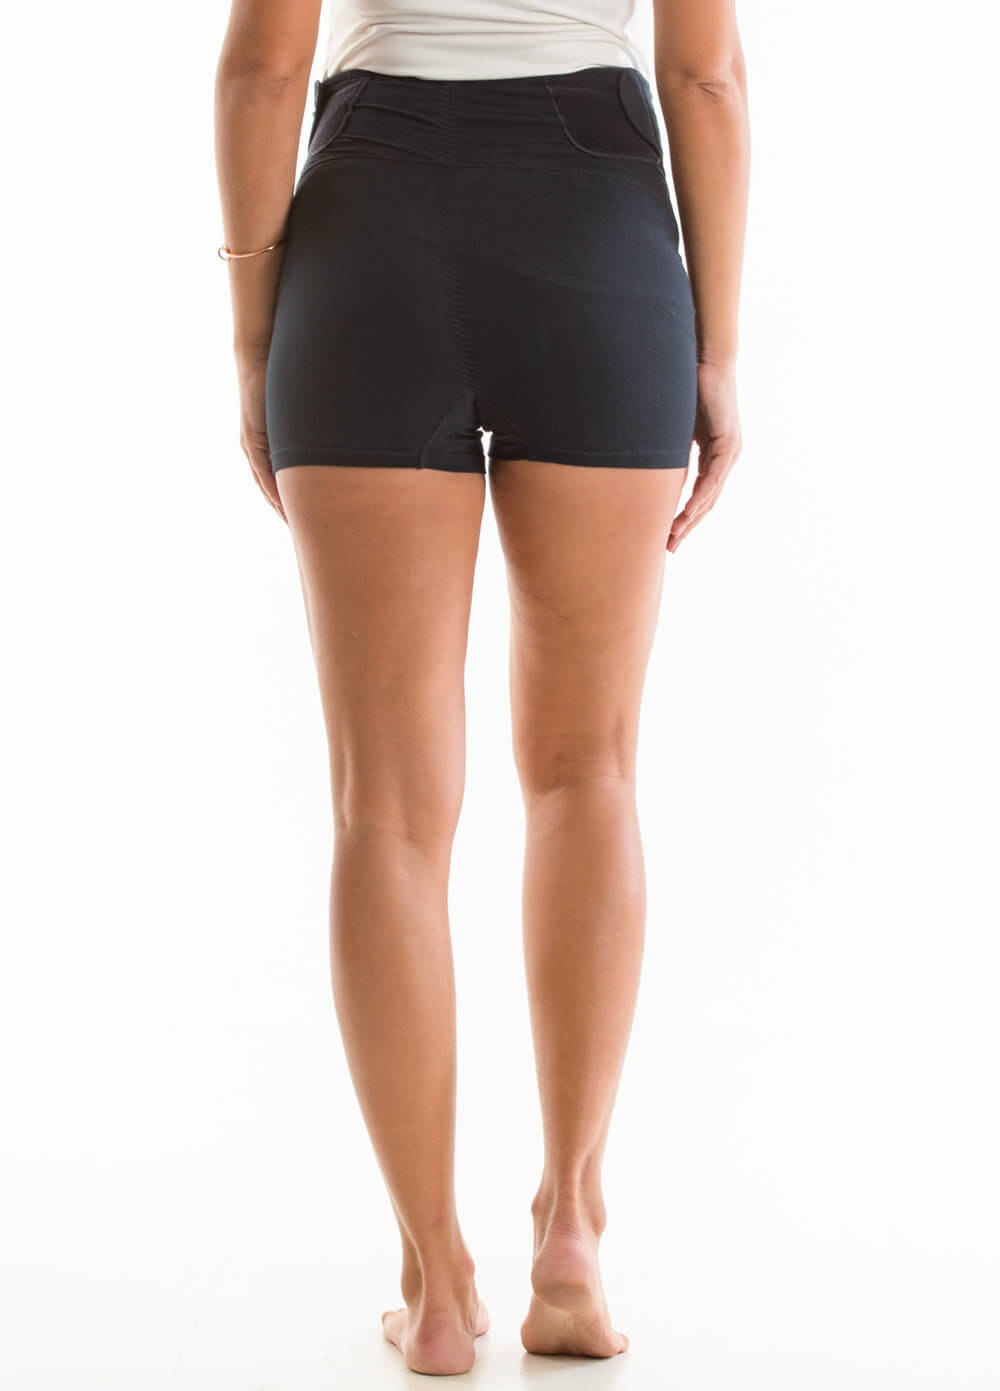 Lucina Built-In Support Maternity Shorts in Black by Queen Bee